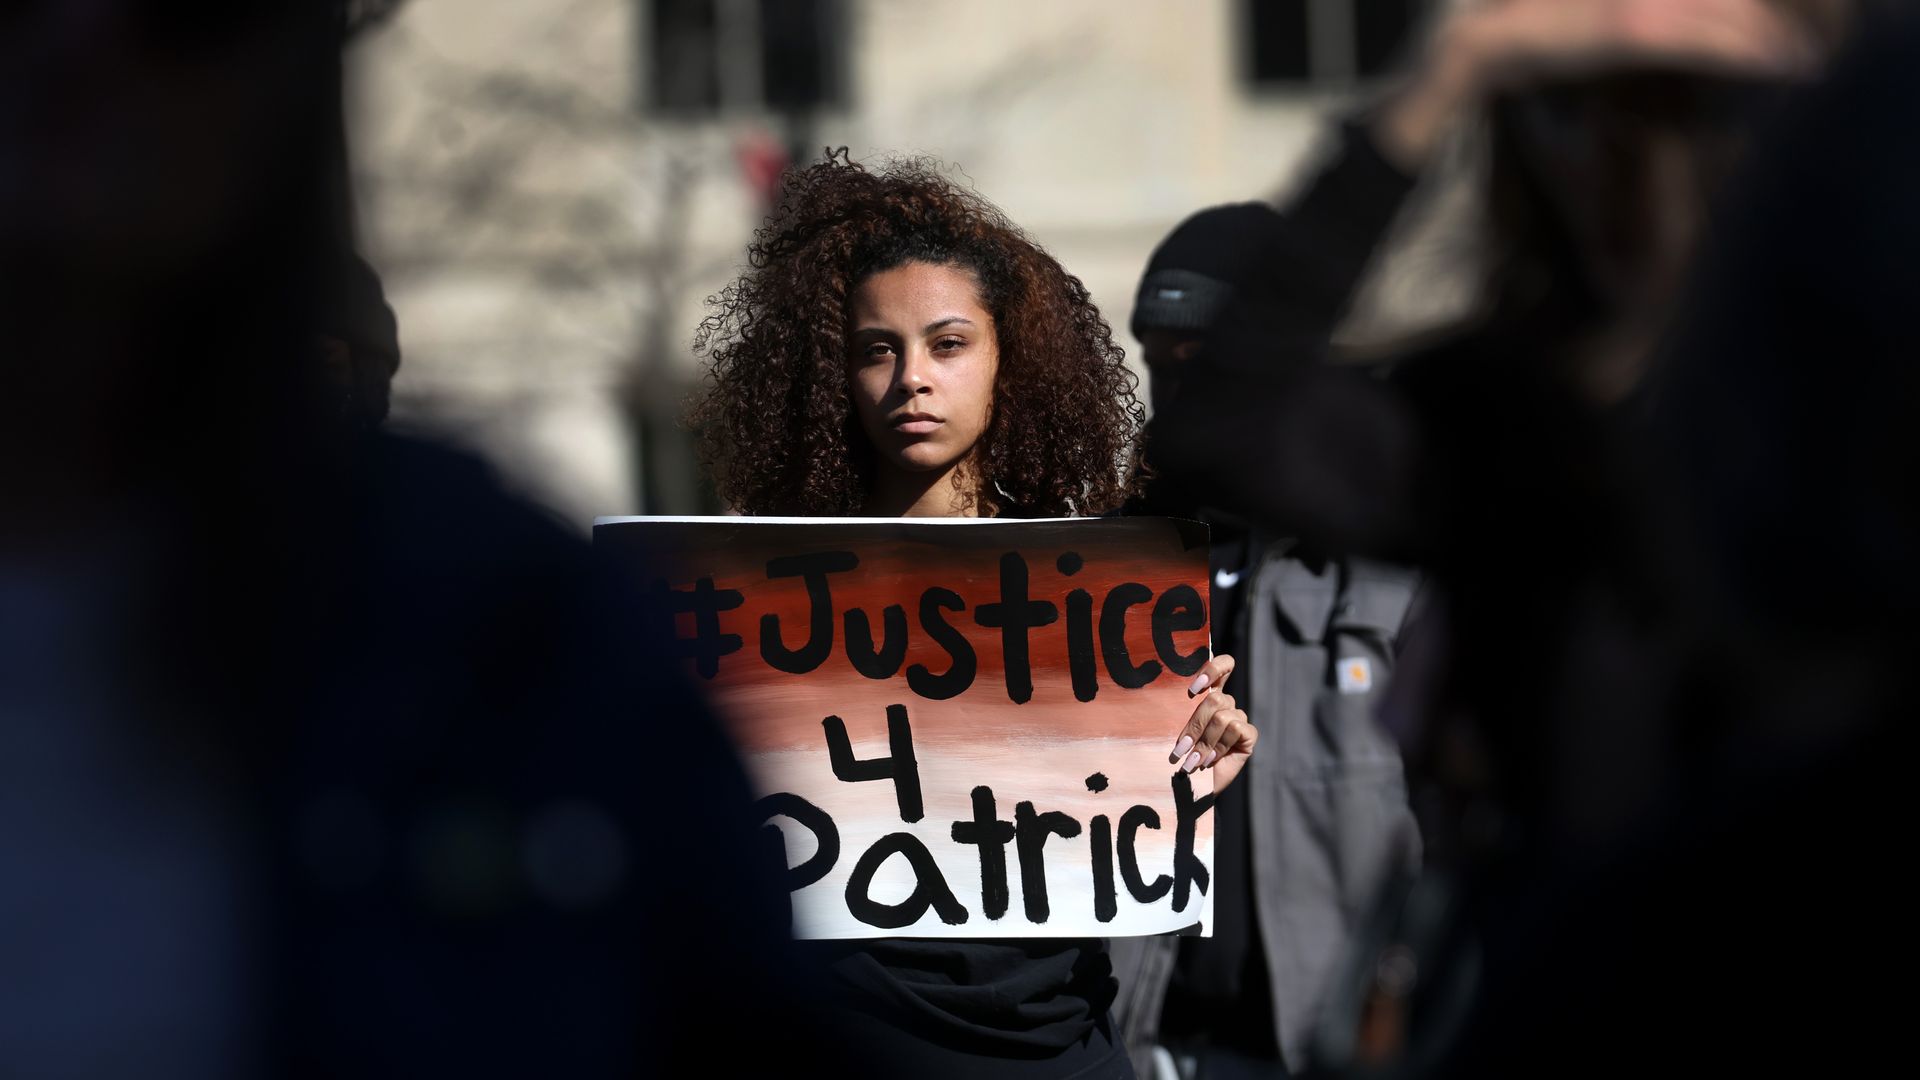 Photo of a protester holding a sign that says "Justice 4 Patrick"